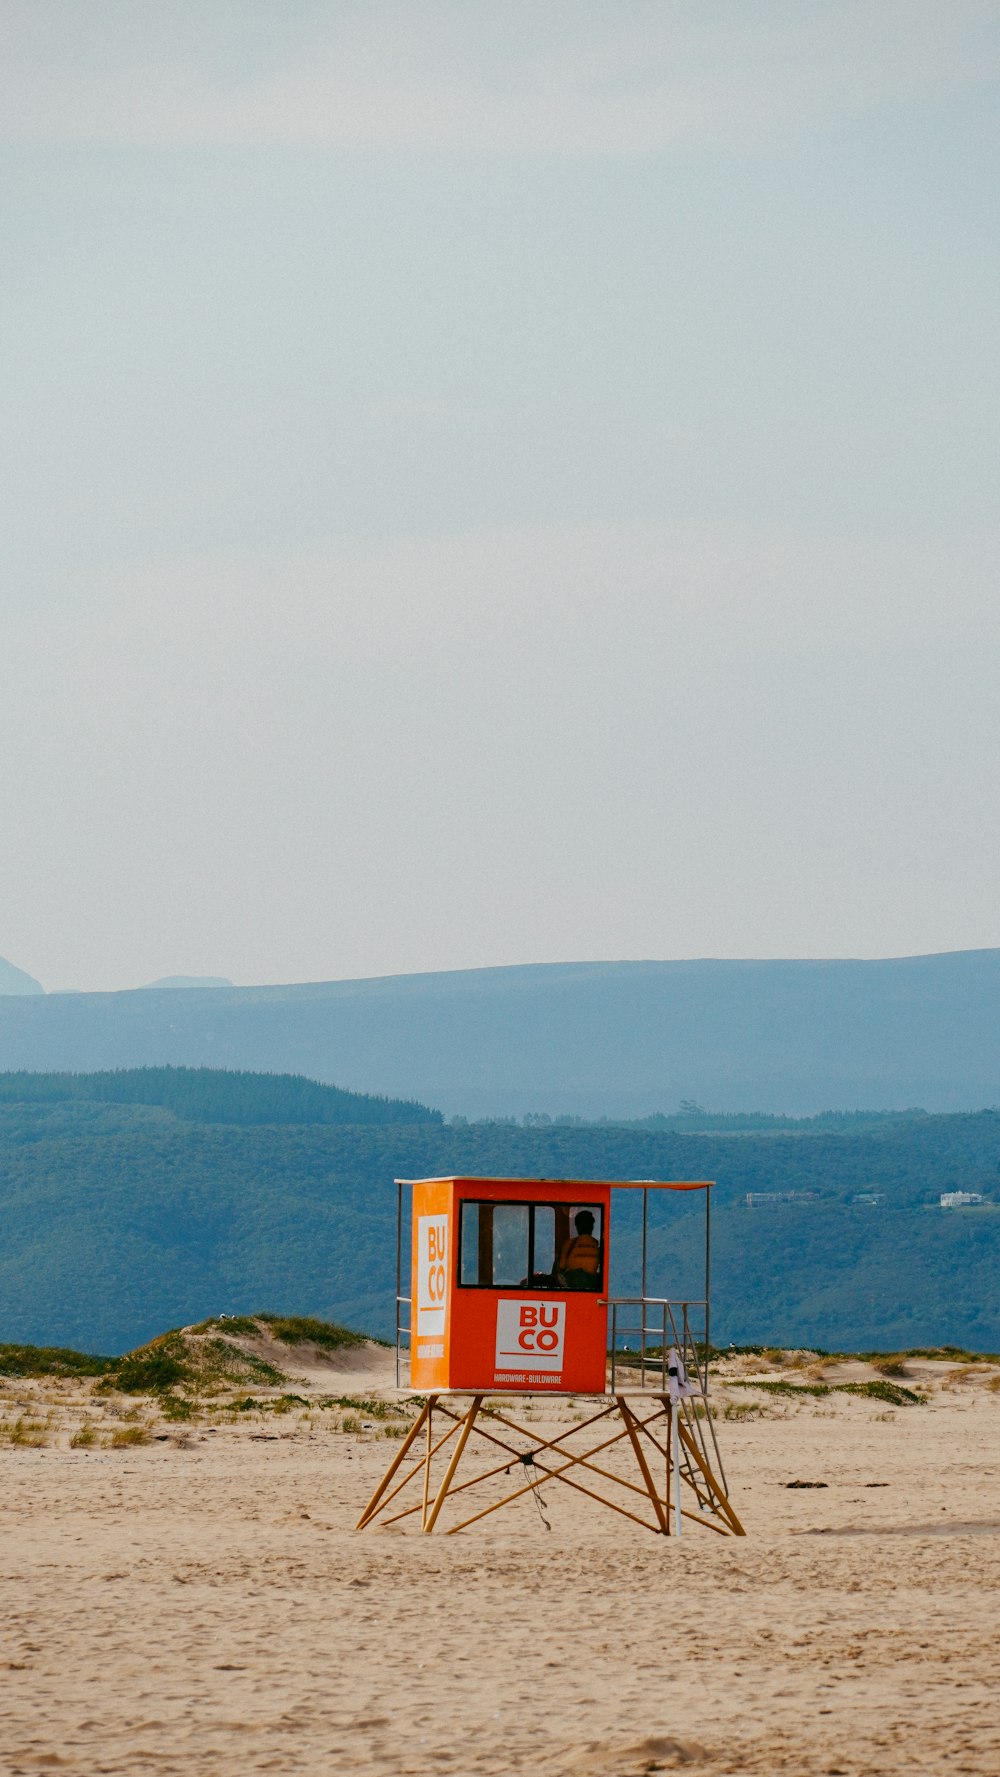 a lifeguard stand on a beach with mountains in the background